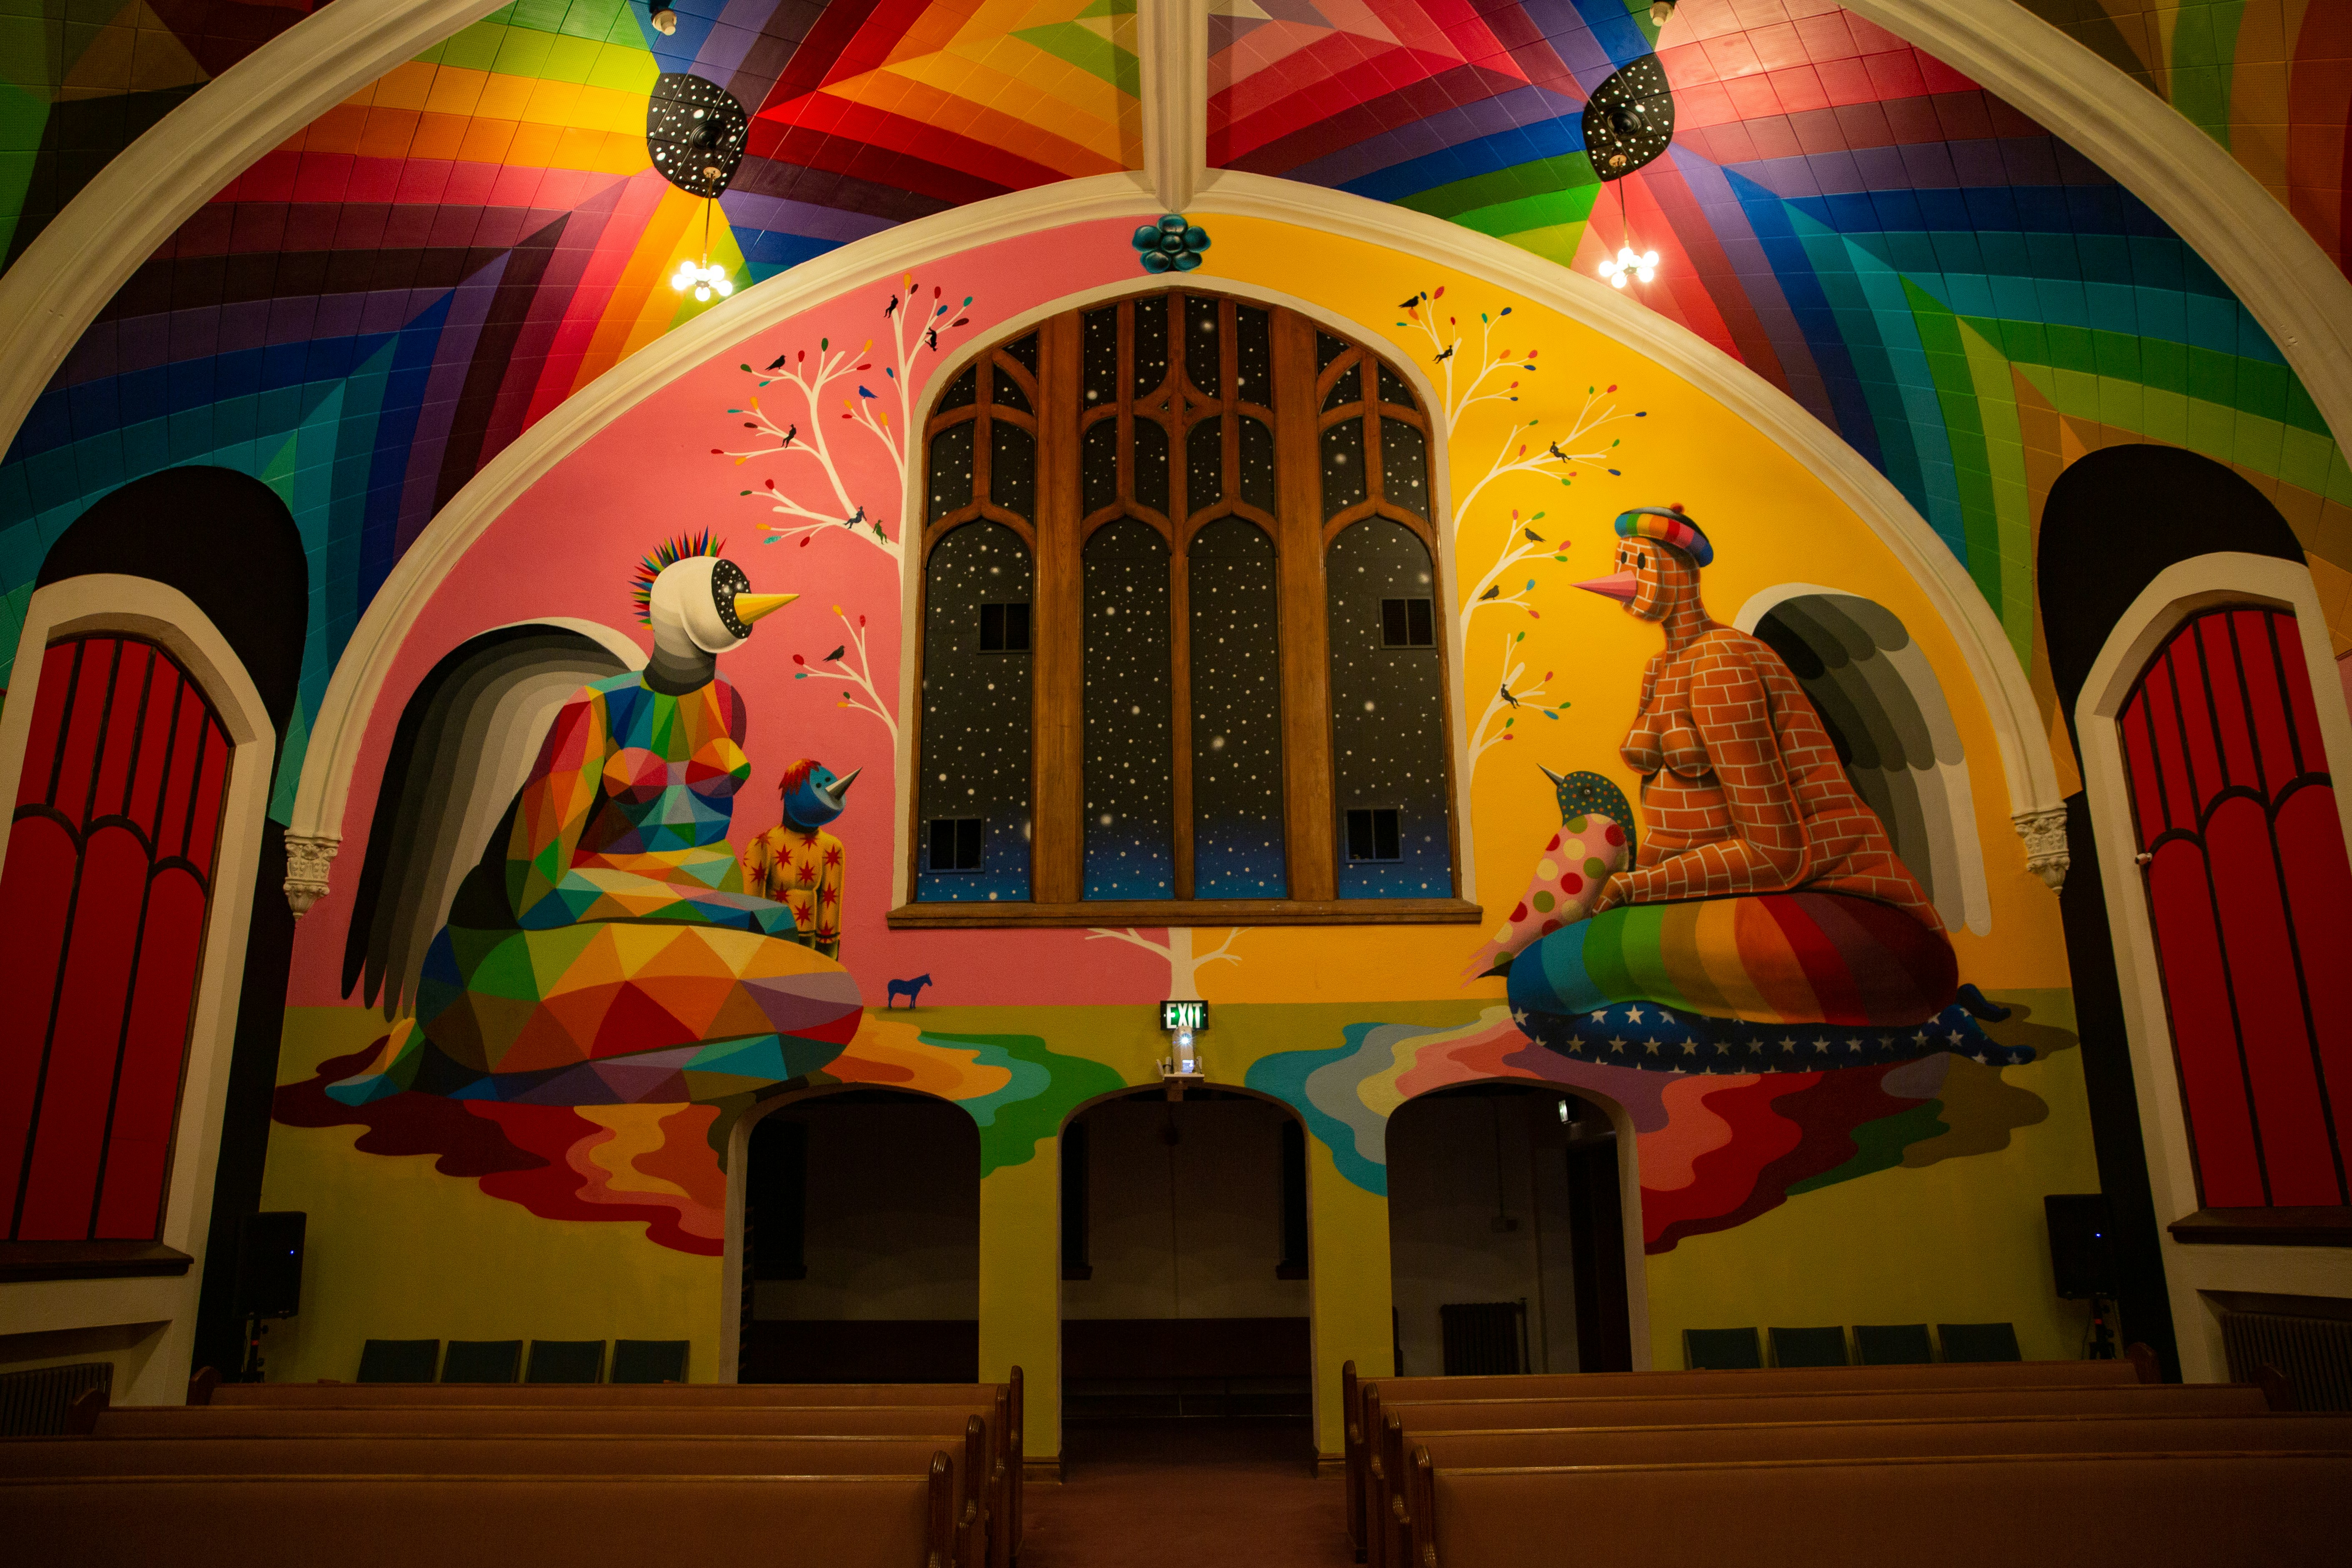 The colorful interior of the Denver Church of Cannabis is made up of a vaulted ceiling painted in a mural of rainbow hues portraying two kneeling female figures with bird-like beaks, one painted with geometric shapes and the other with a brick pattern. A three-paned arch window has warm wood trim and beneath are three arched doors in front of rows of wooden pews.